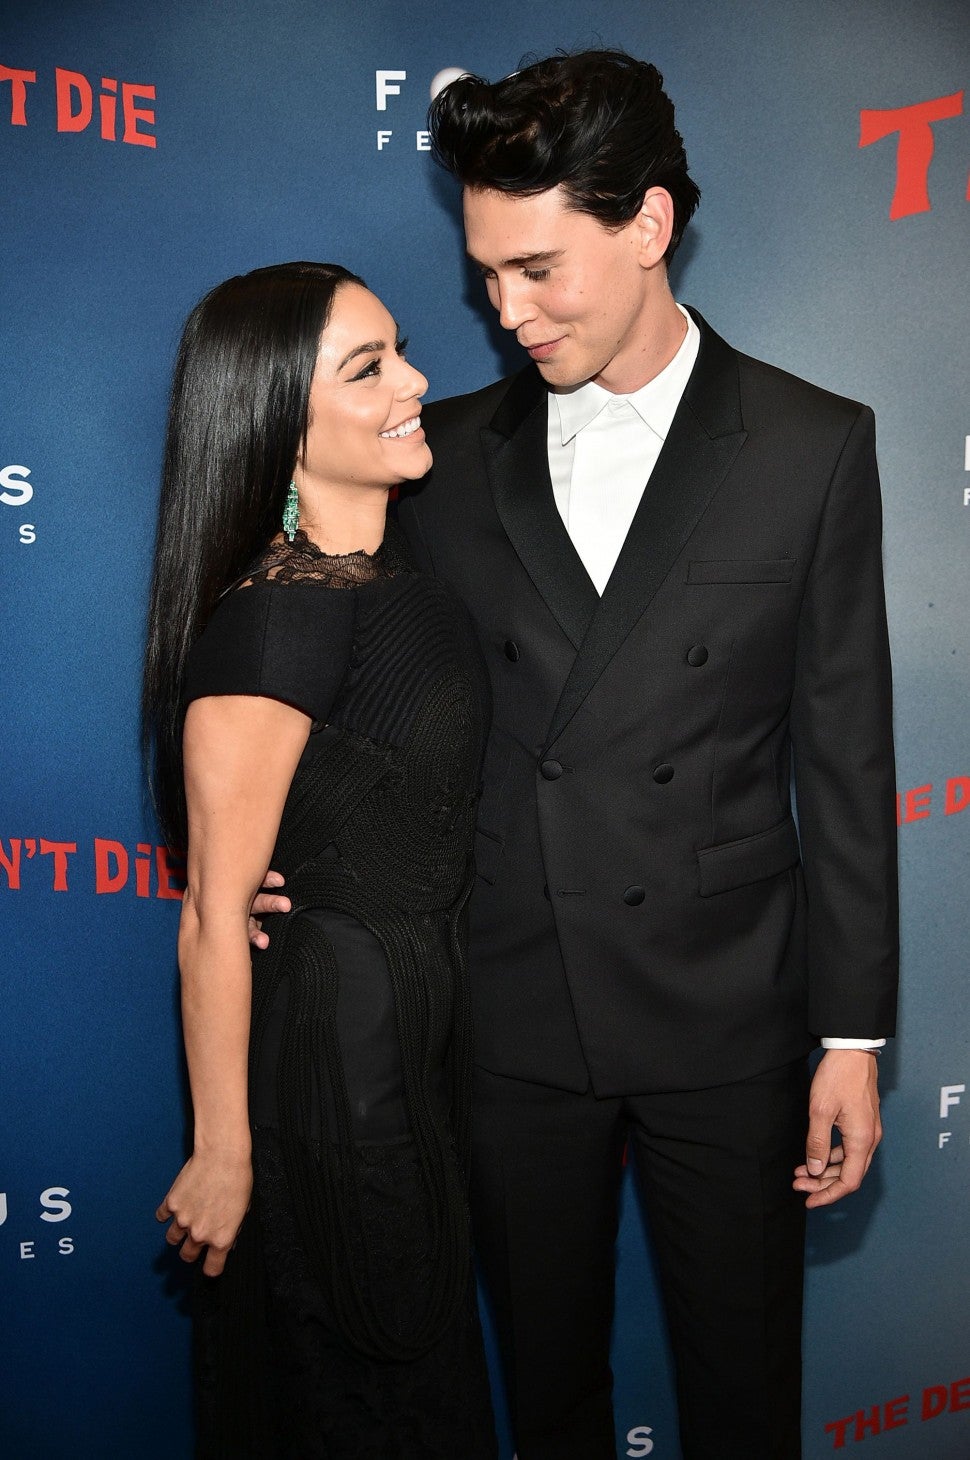 Vanessa Hudgens and Austin Butler at 'The Dead Don't Die' premiere in New York City on June 10